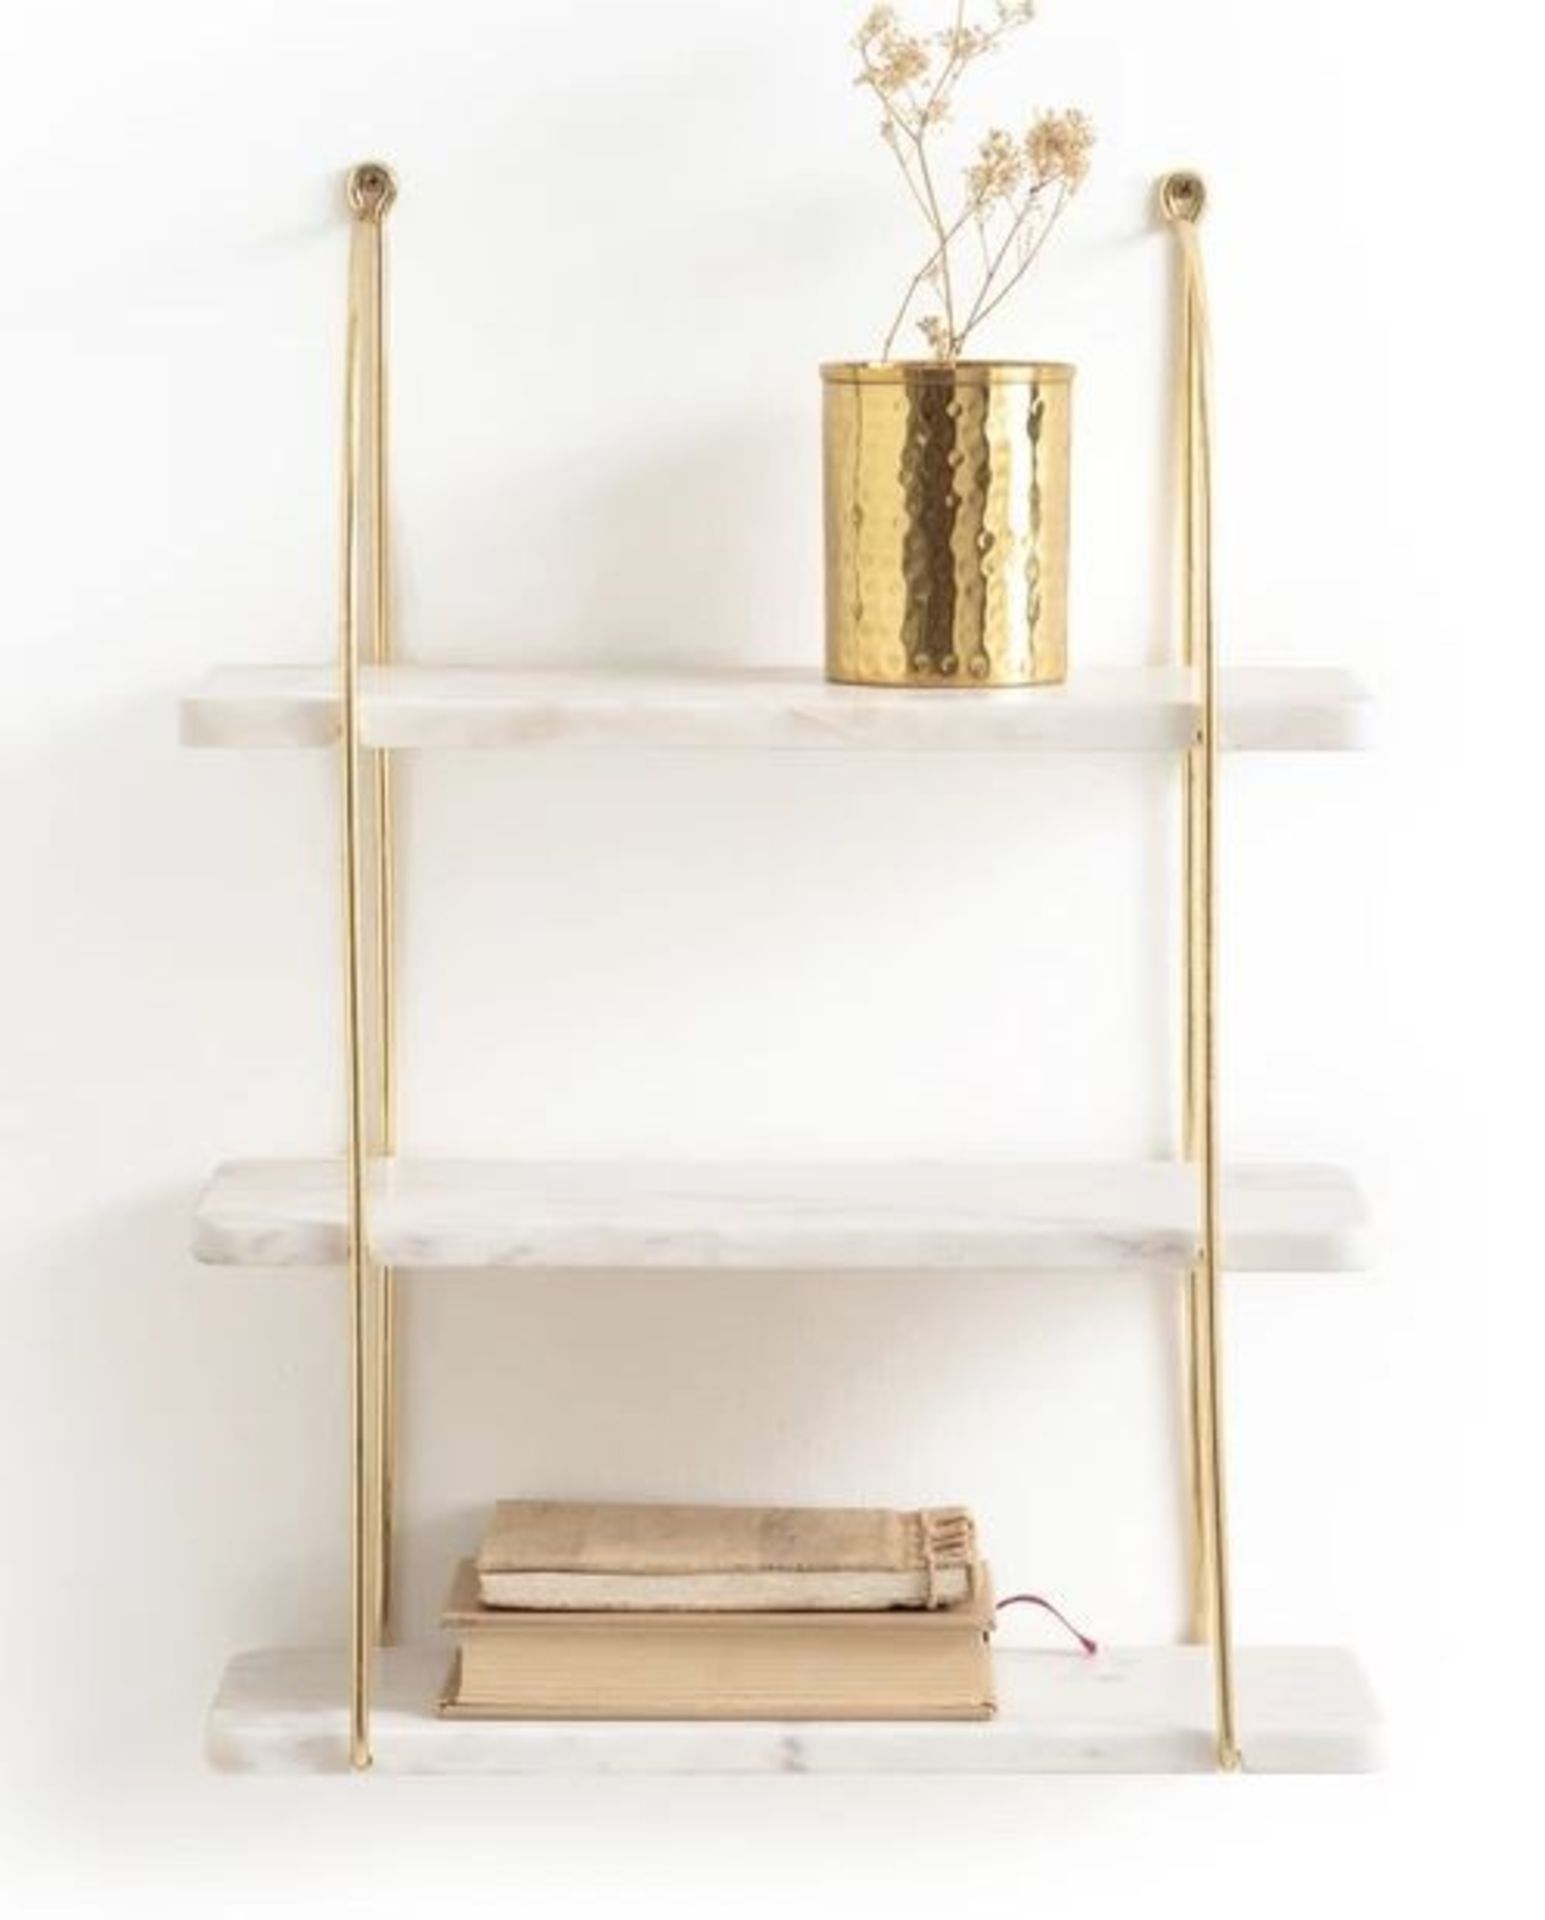 1 GRADE B FITIA MARBEL AND METAL WALL SHELF / PLEASE NOTE ONE OF THE MARBLE SHELVES IS BROKEN /